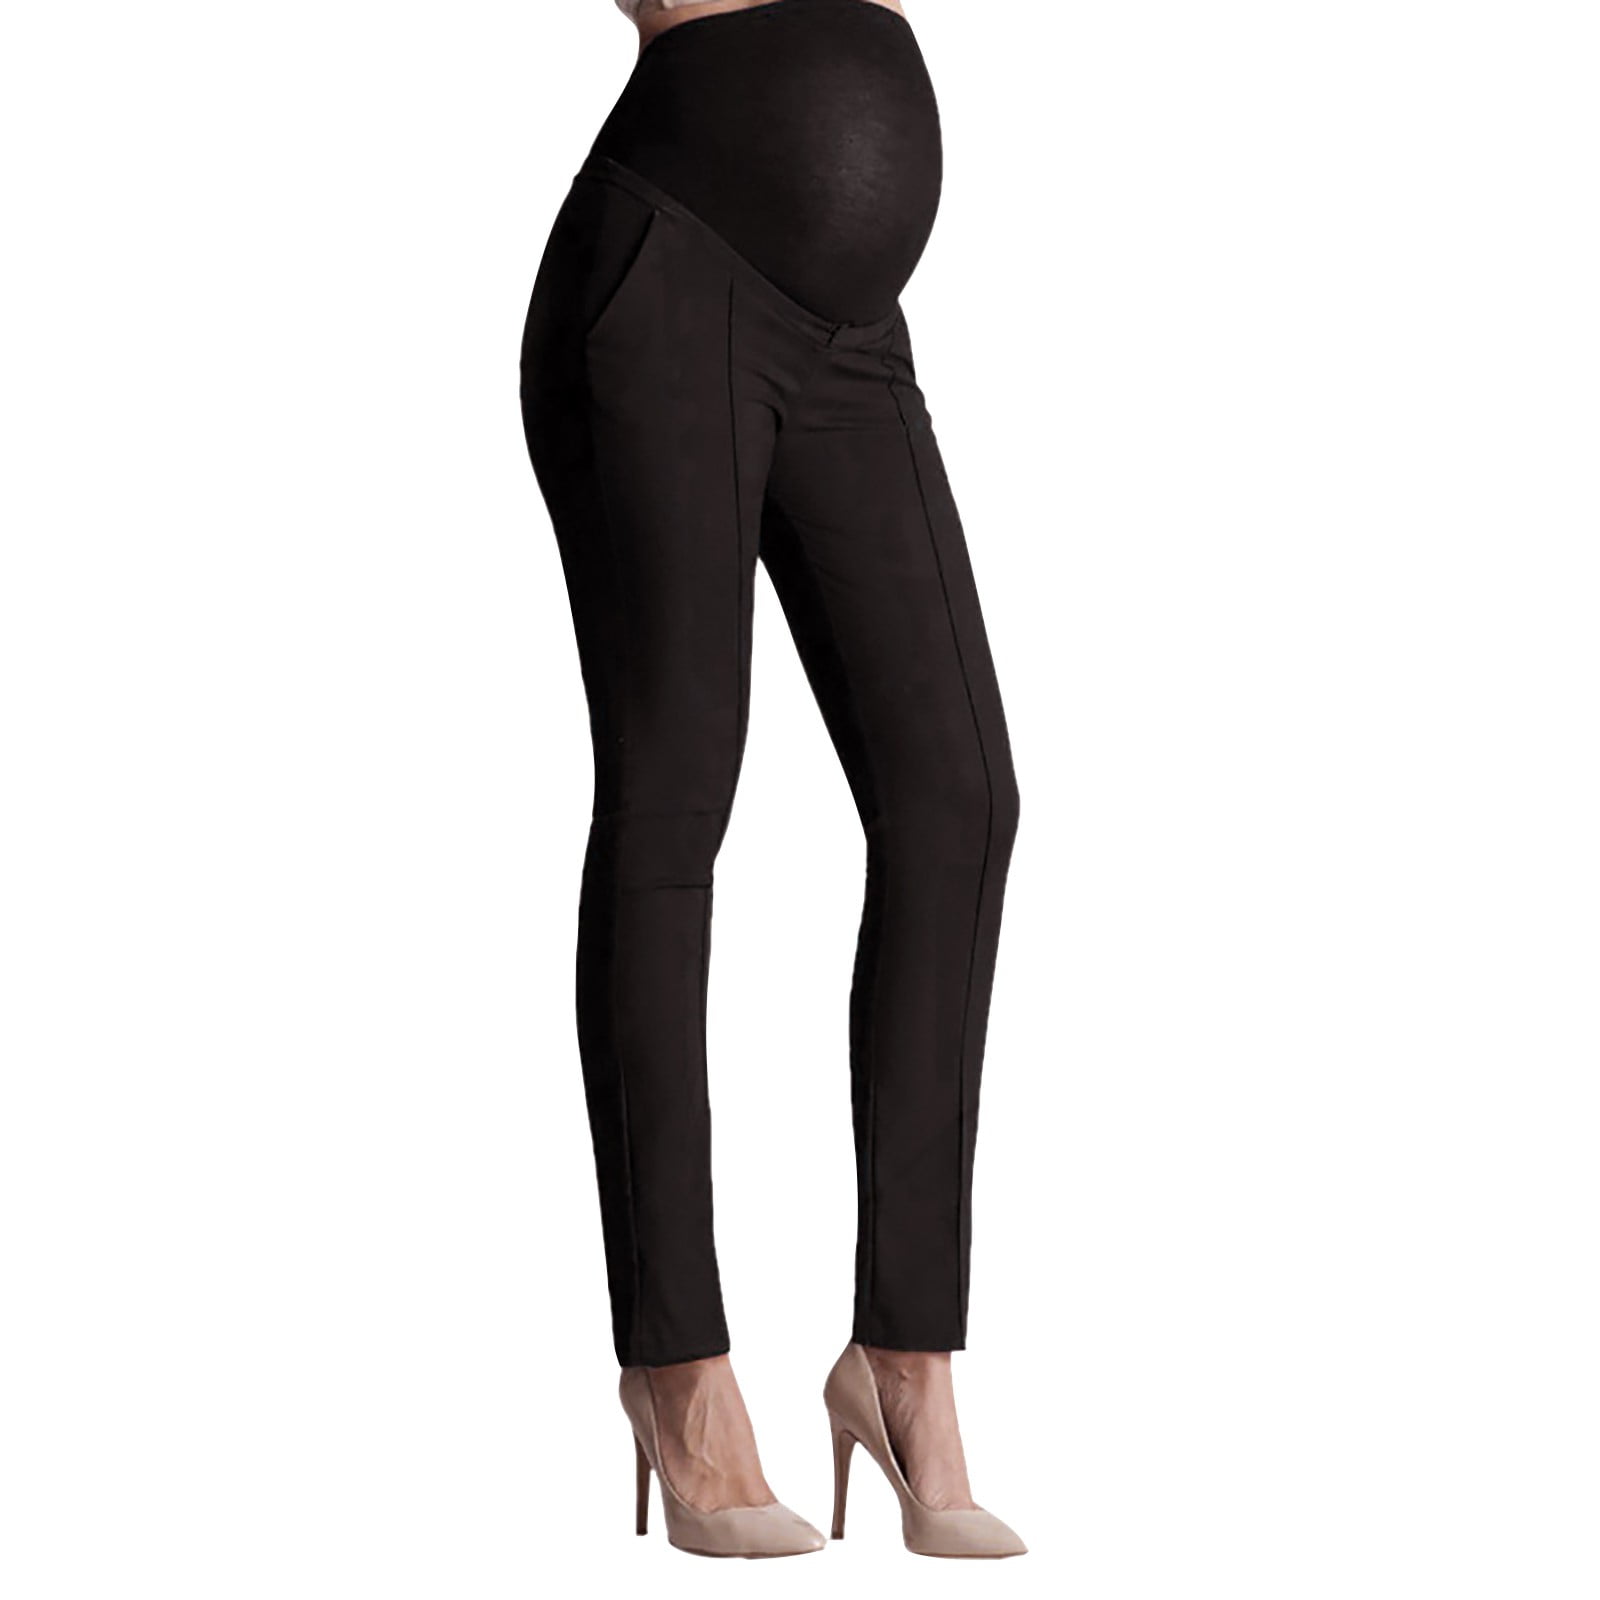 NECHOLOGY Maternity Leggings over The Belly Women's Maternity Pants Stretch  Career Dress Pants Work Pregnancy Jeans Black XX-Large 